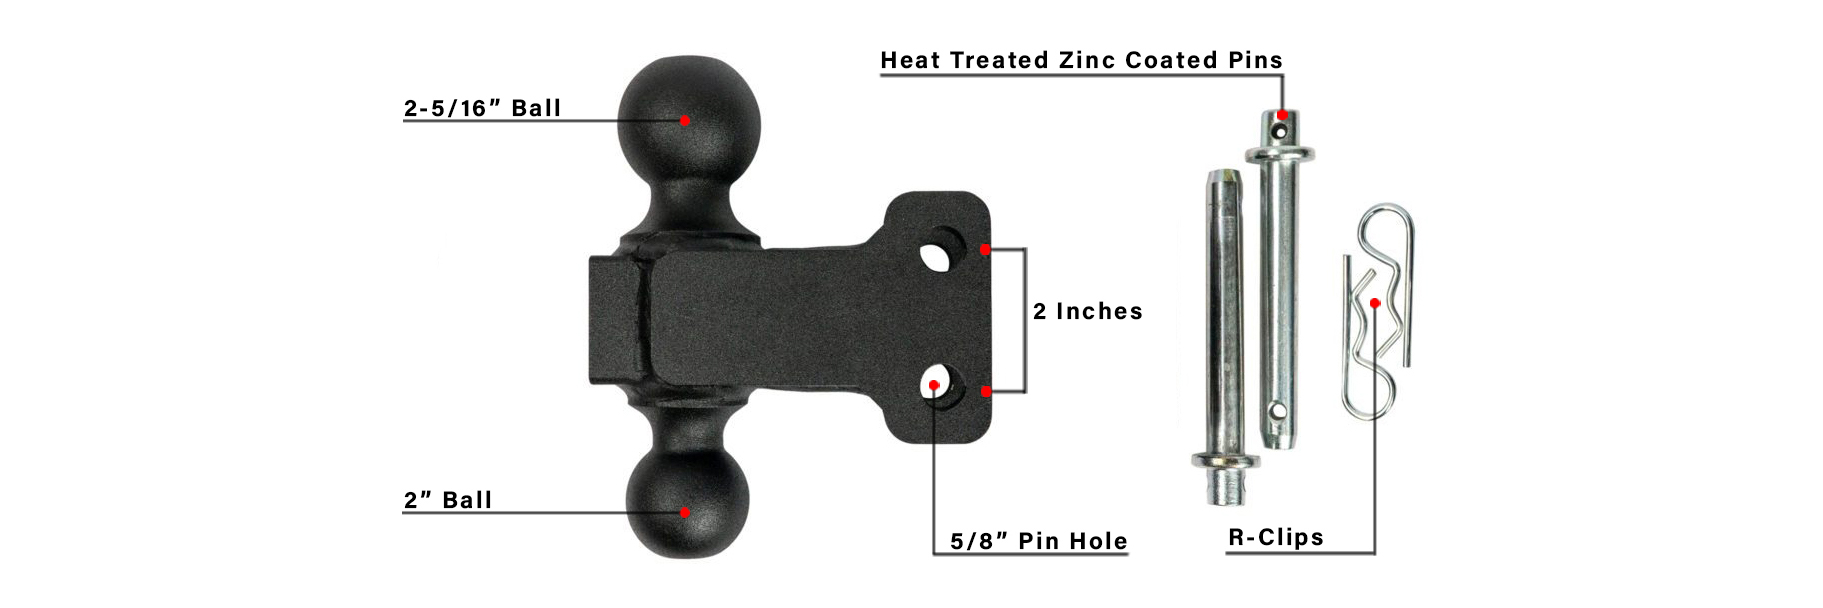 Dual Ball with Pins and R-Clips Specifications